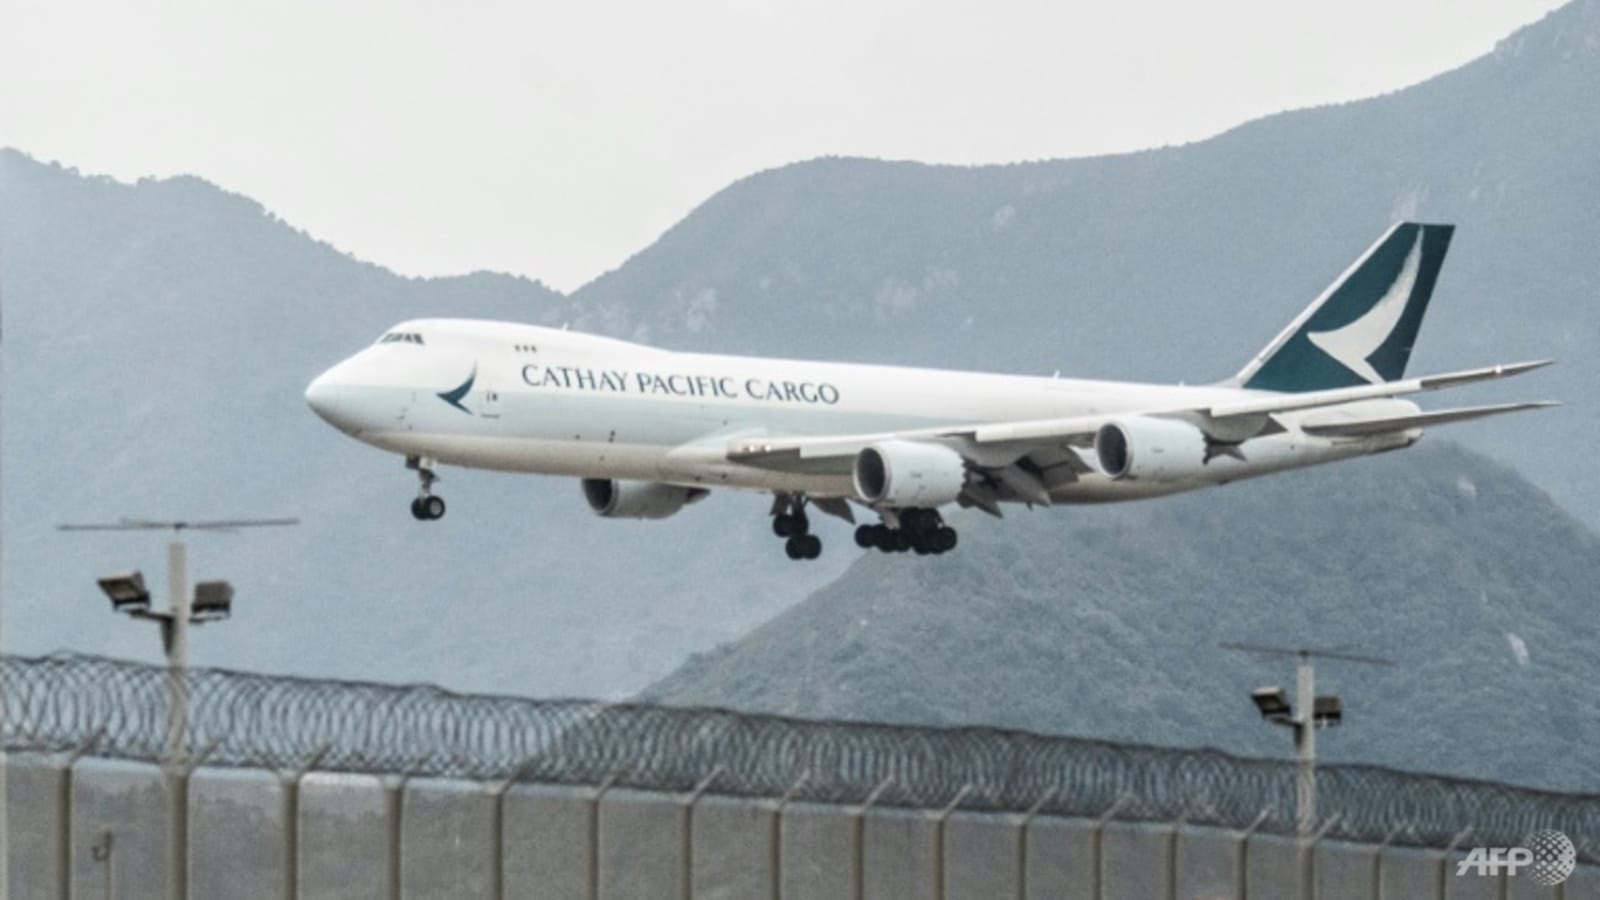 cathay-plans-world’s-longest-passenger-flight,-avoids-russian-airspace